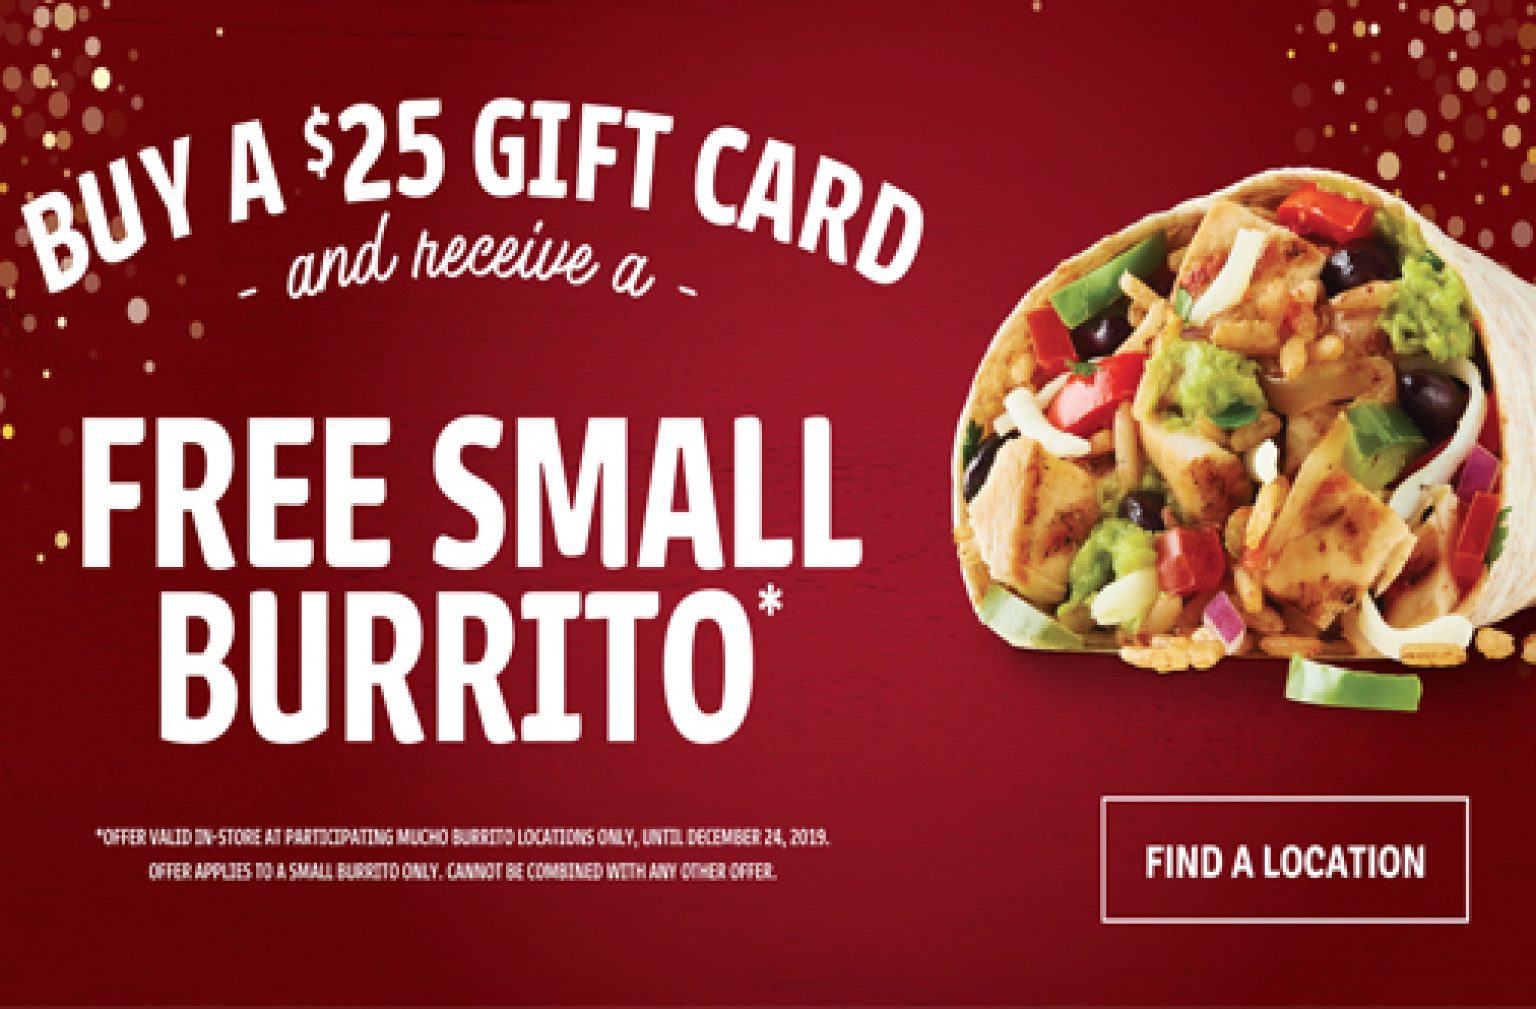 Mucho Burrito Holiday Gift Card Offer — Deals from SaveaLoonie!